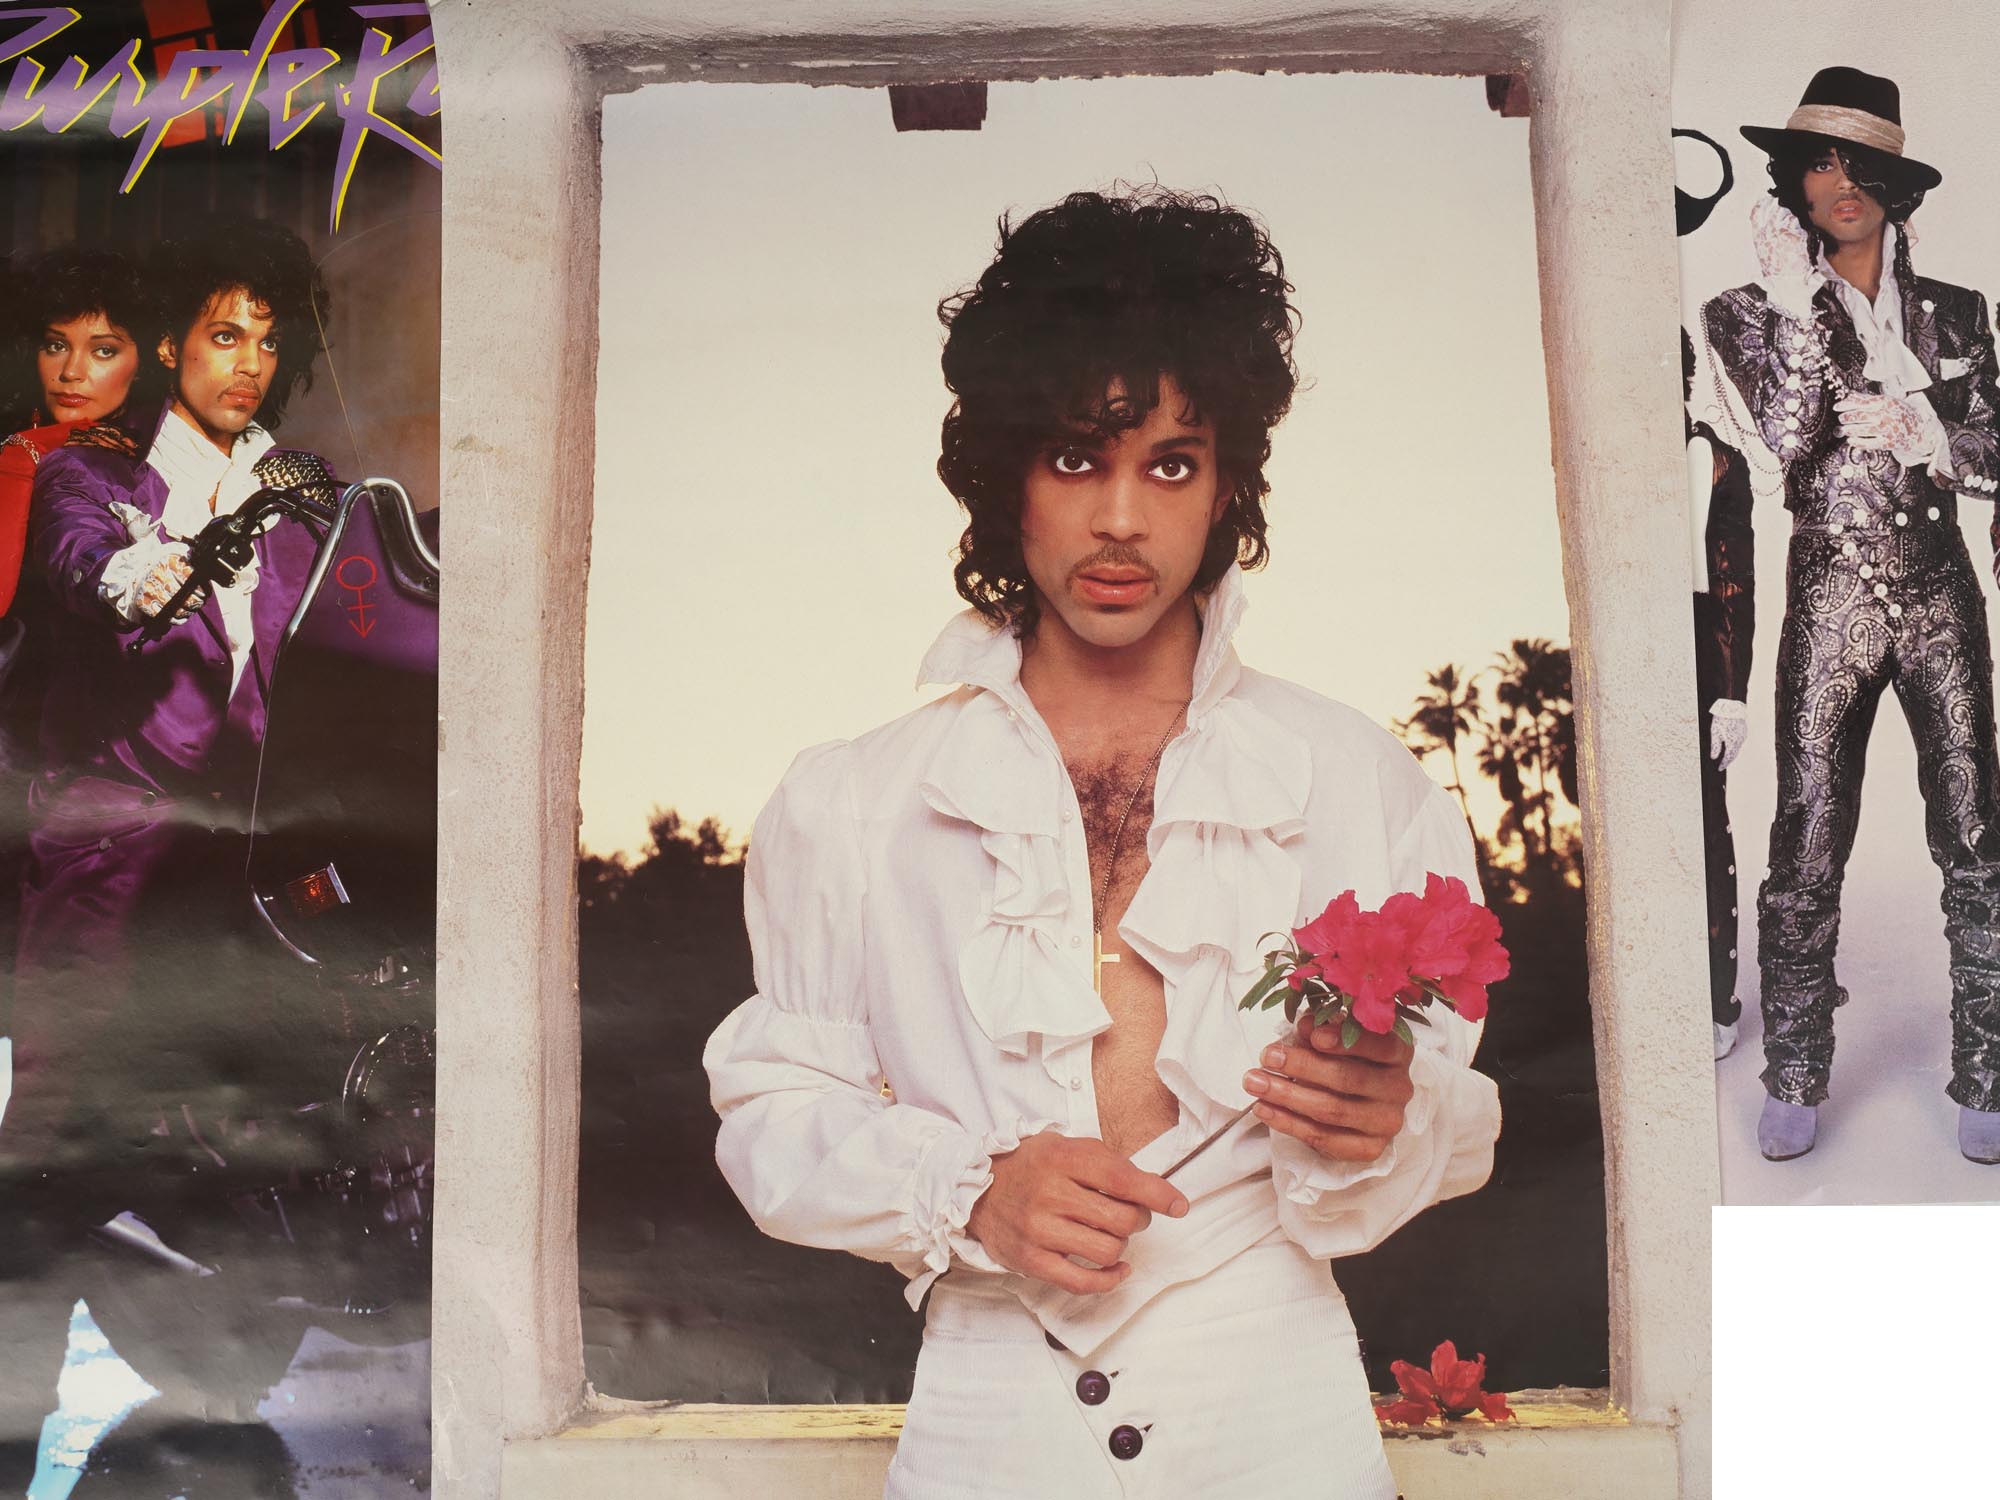 A LOT OF THREE ORIGINAL MUSICIAN PRINCE POSTERS